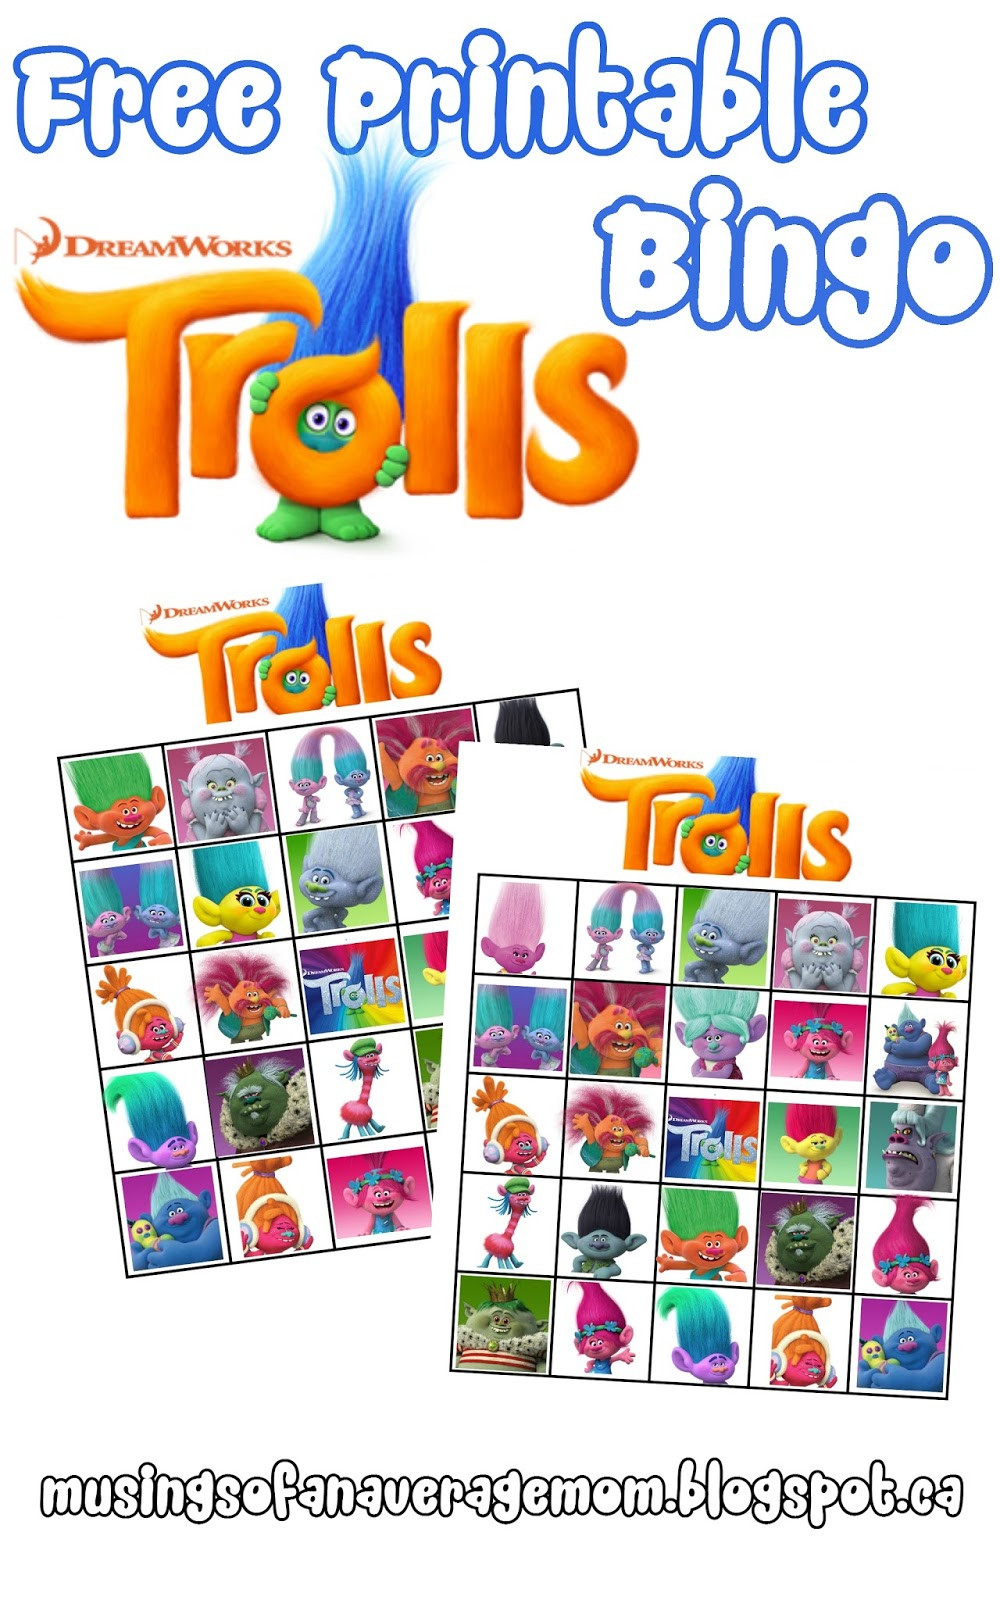 Trolls Party Game Ideas
 Musings of an Average Mom Everything You Need for a